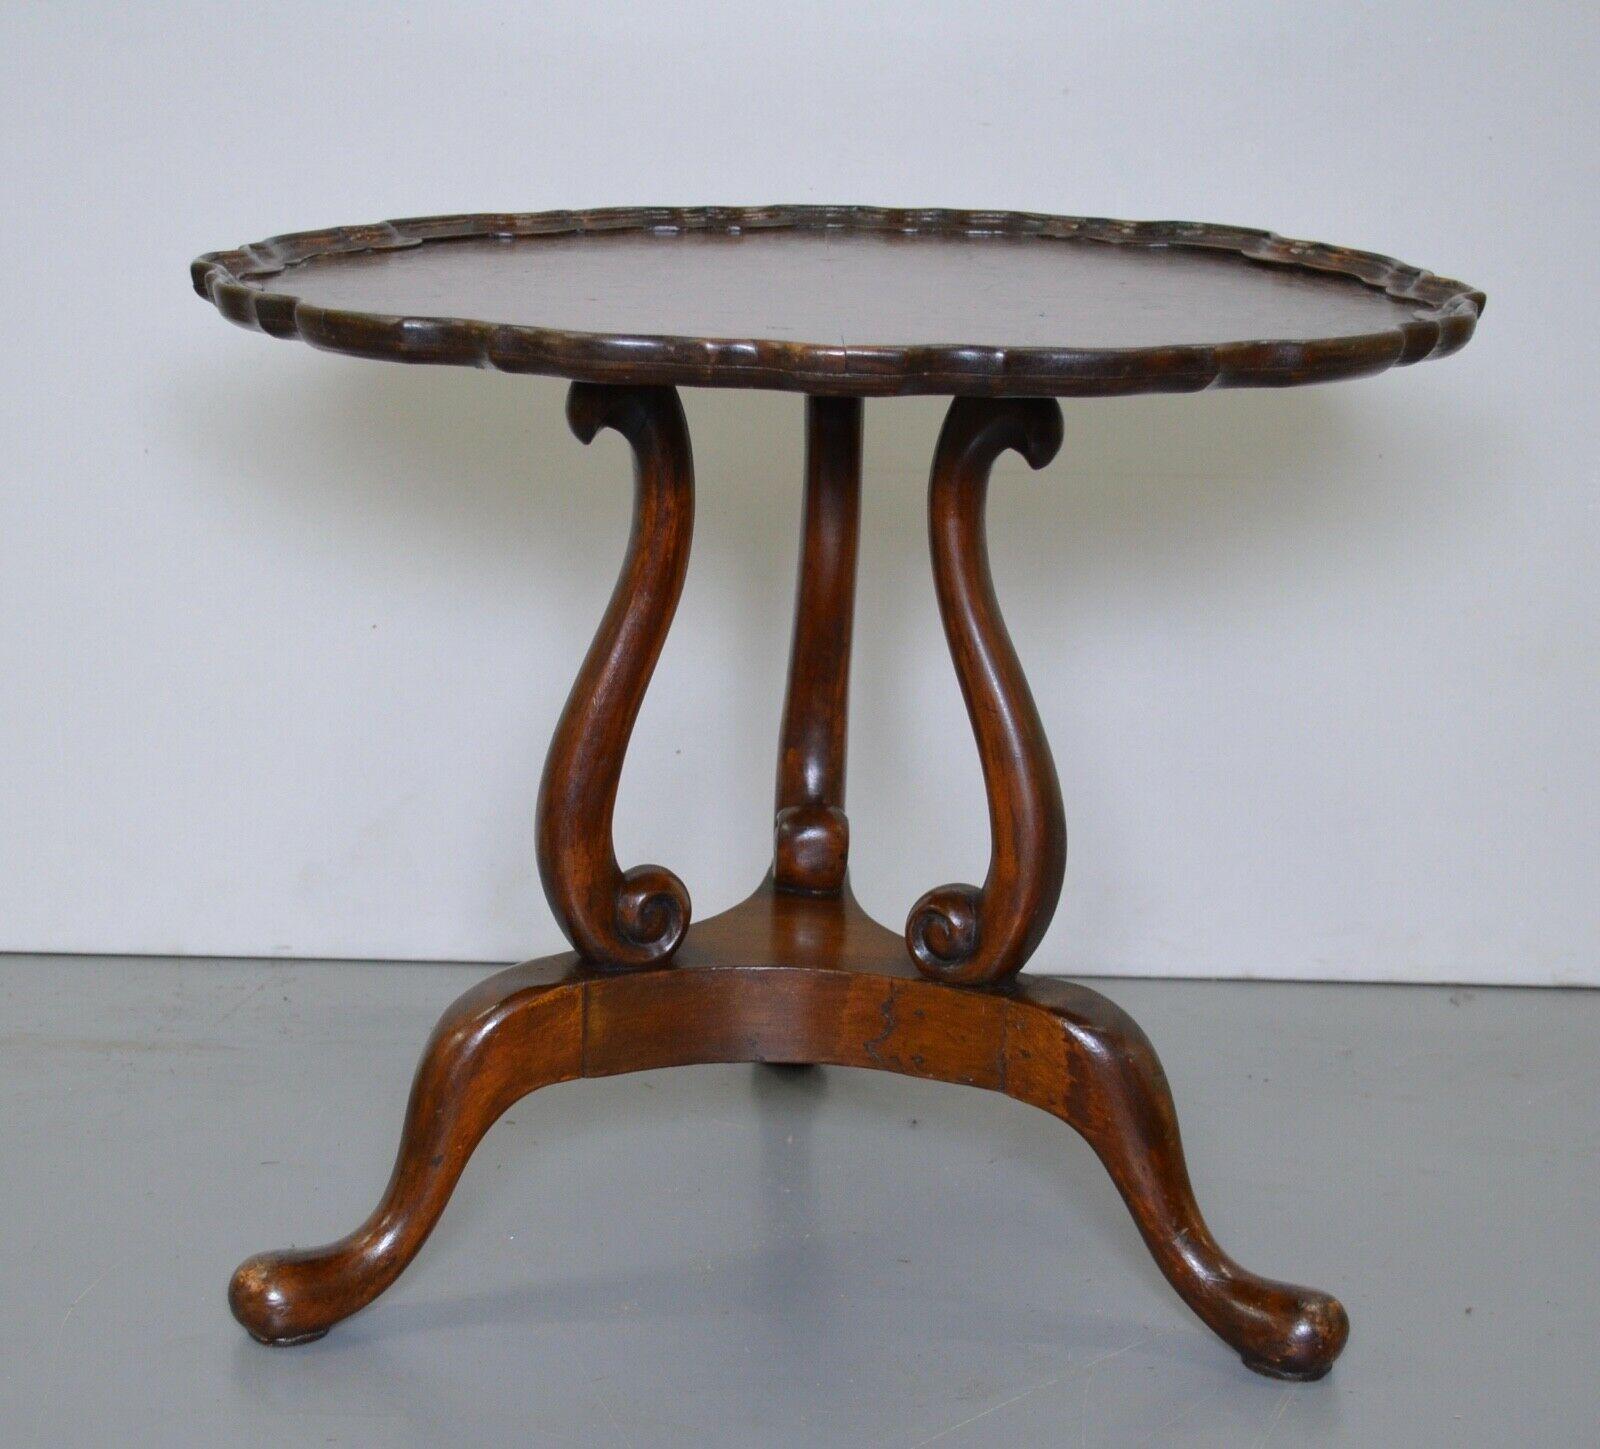 GEORGIAN REVIVIAL BURR-WALNUT OCCASiONAL COFFEE LAMP TABLE For Sale 3